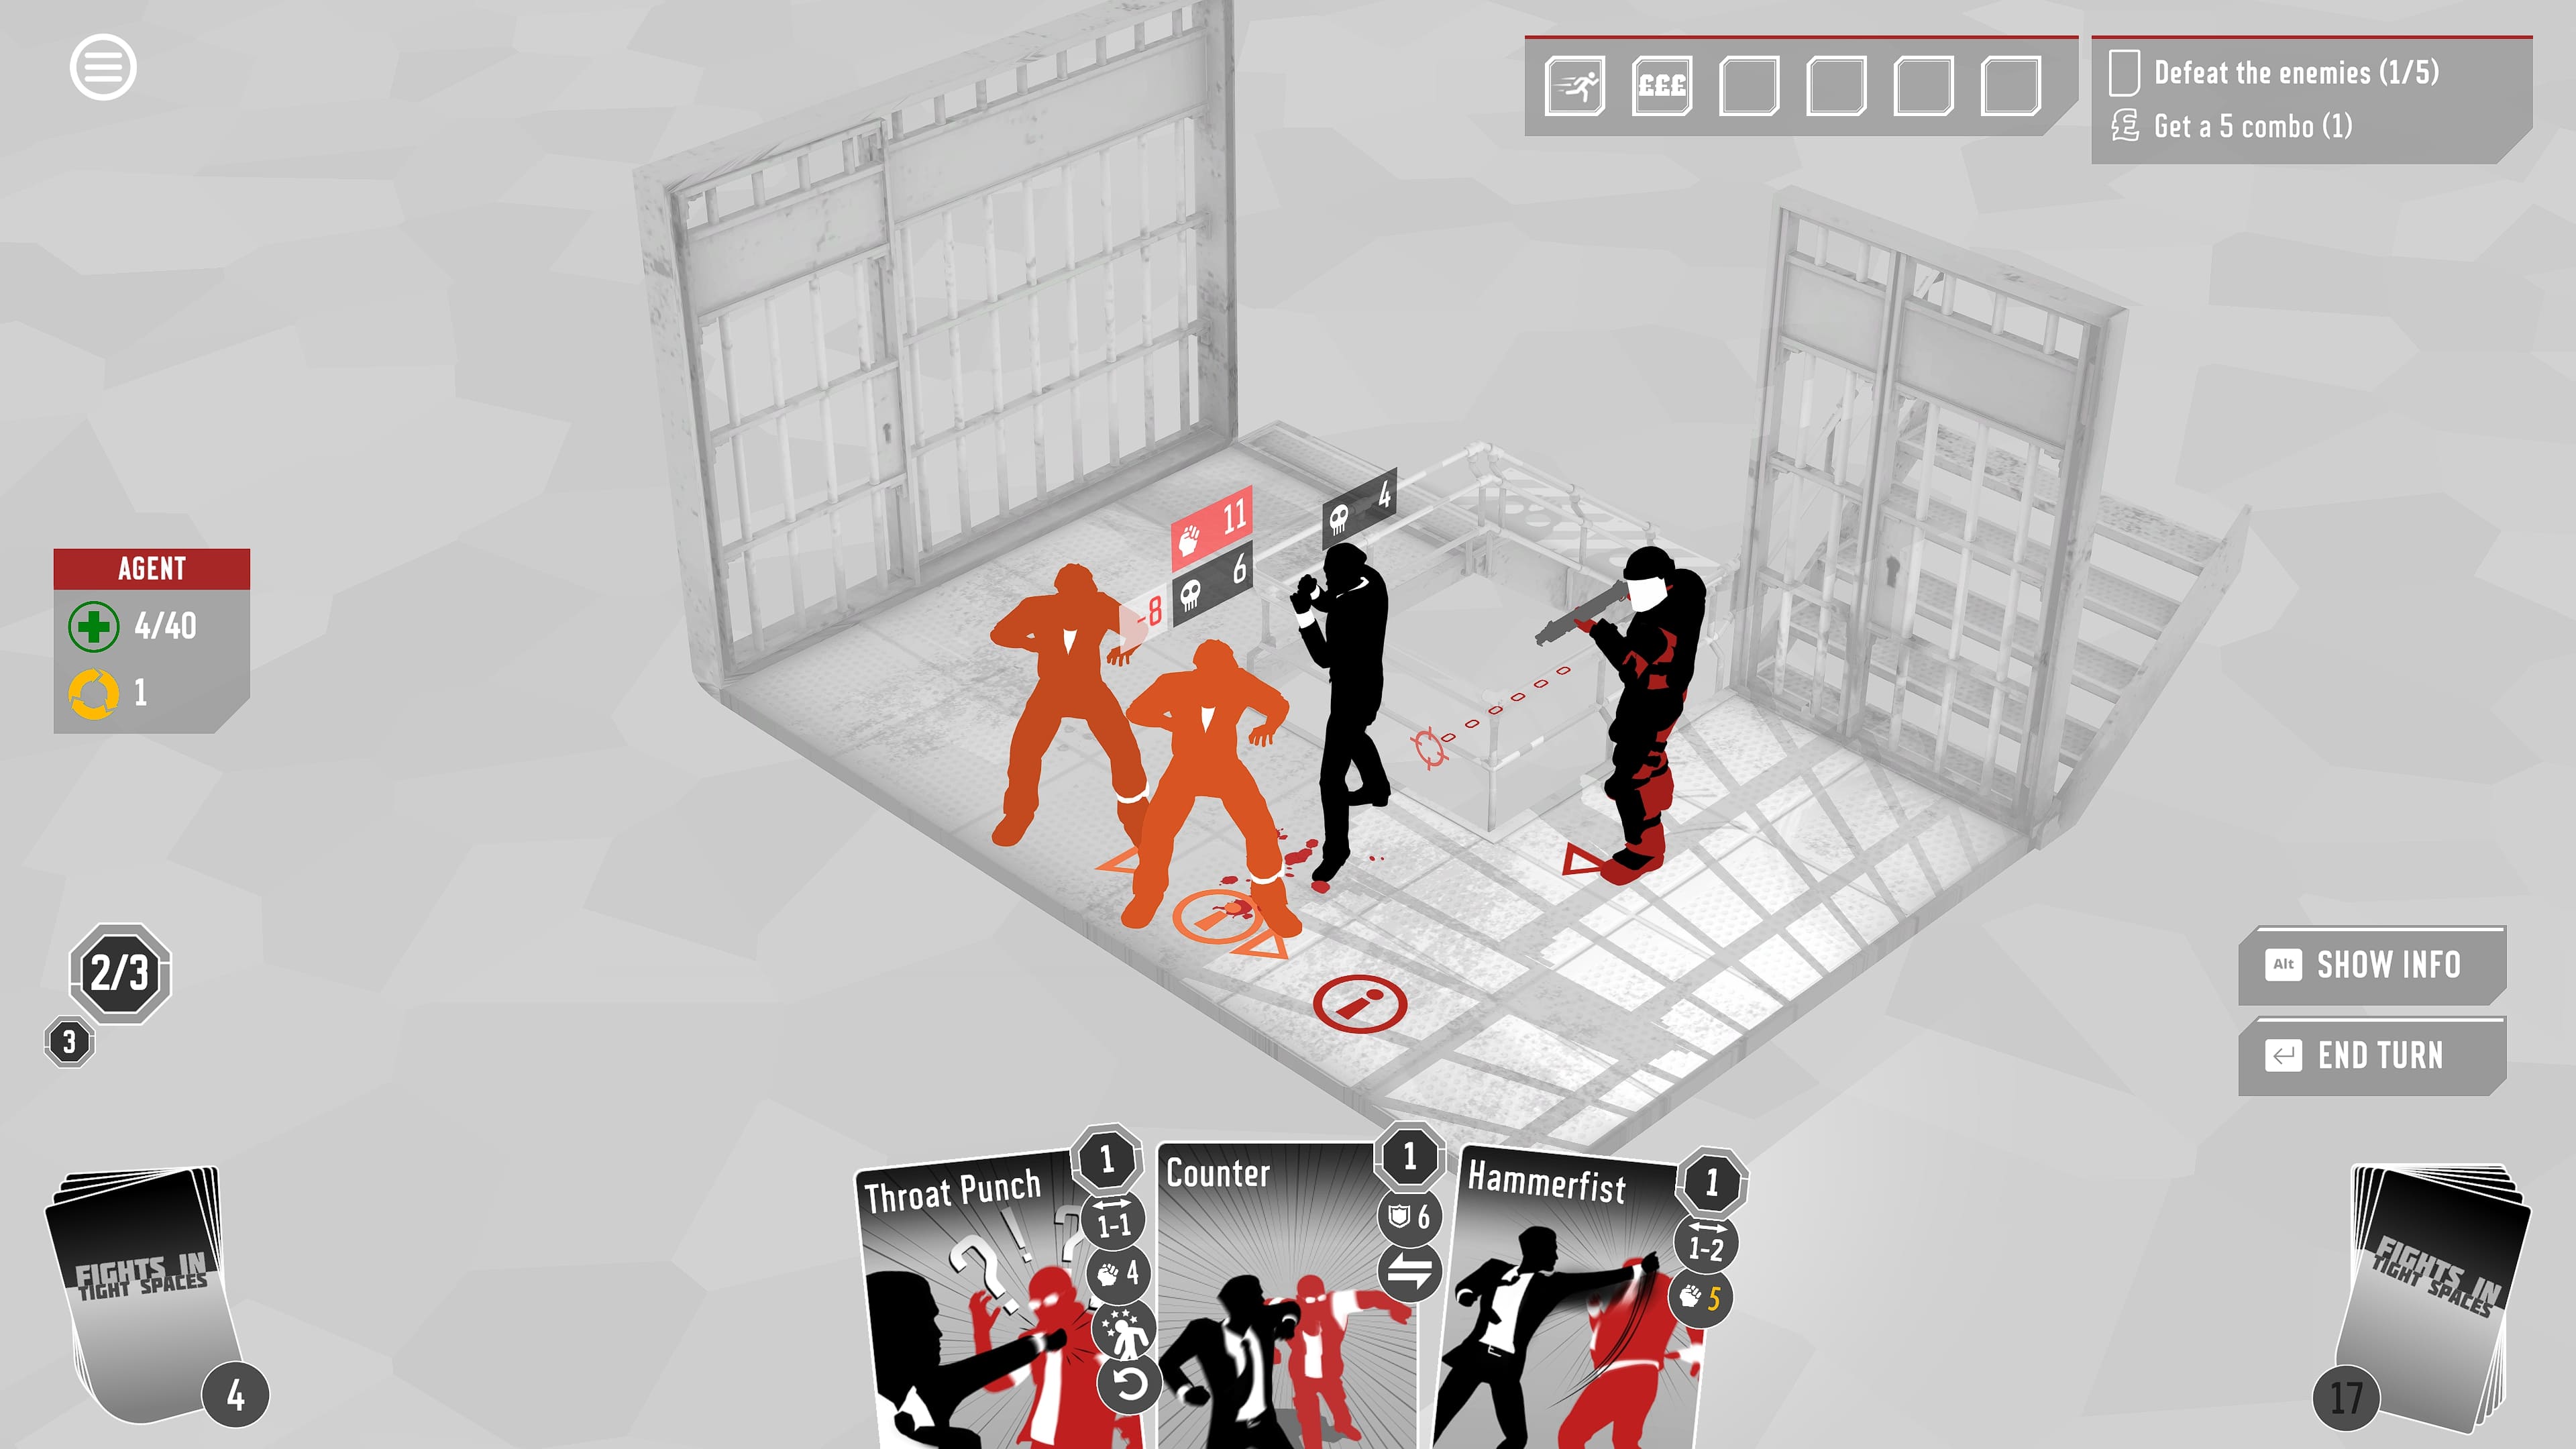 Игры 24. Fights in tight Spaces. Карточный рогалик файтинг. I Fight for users.